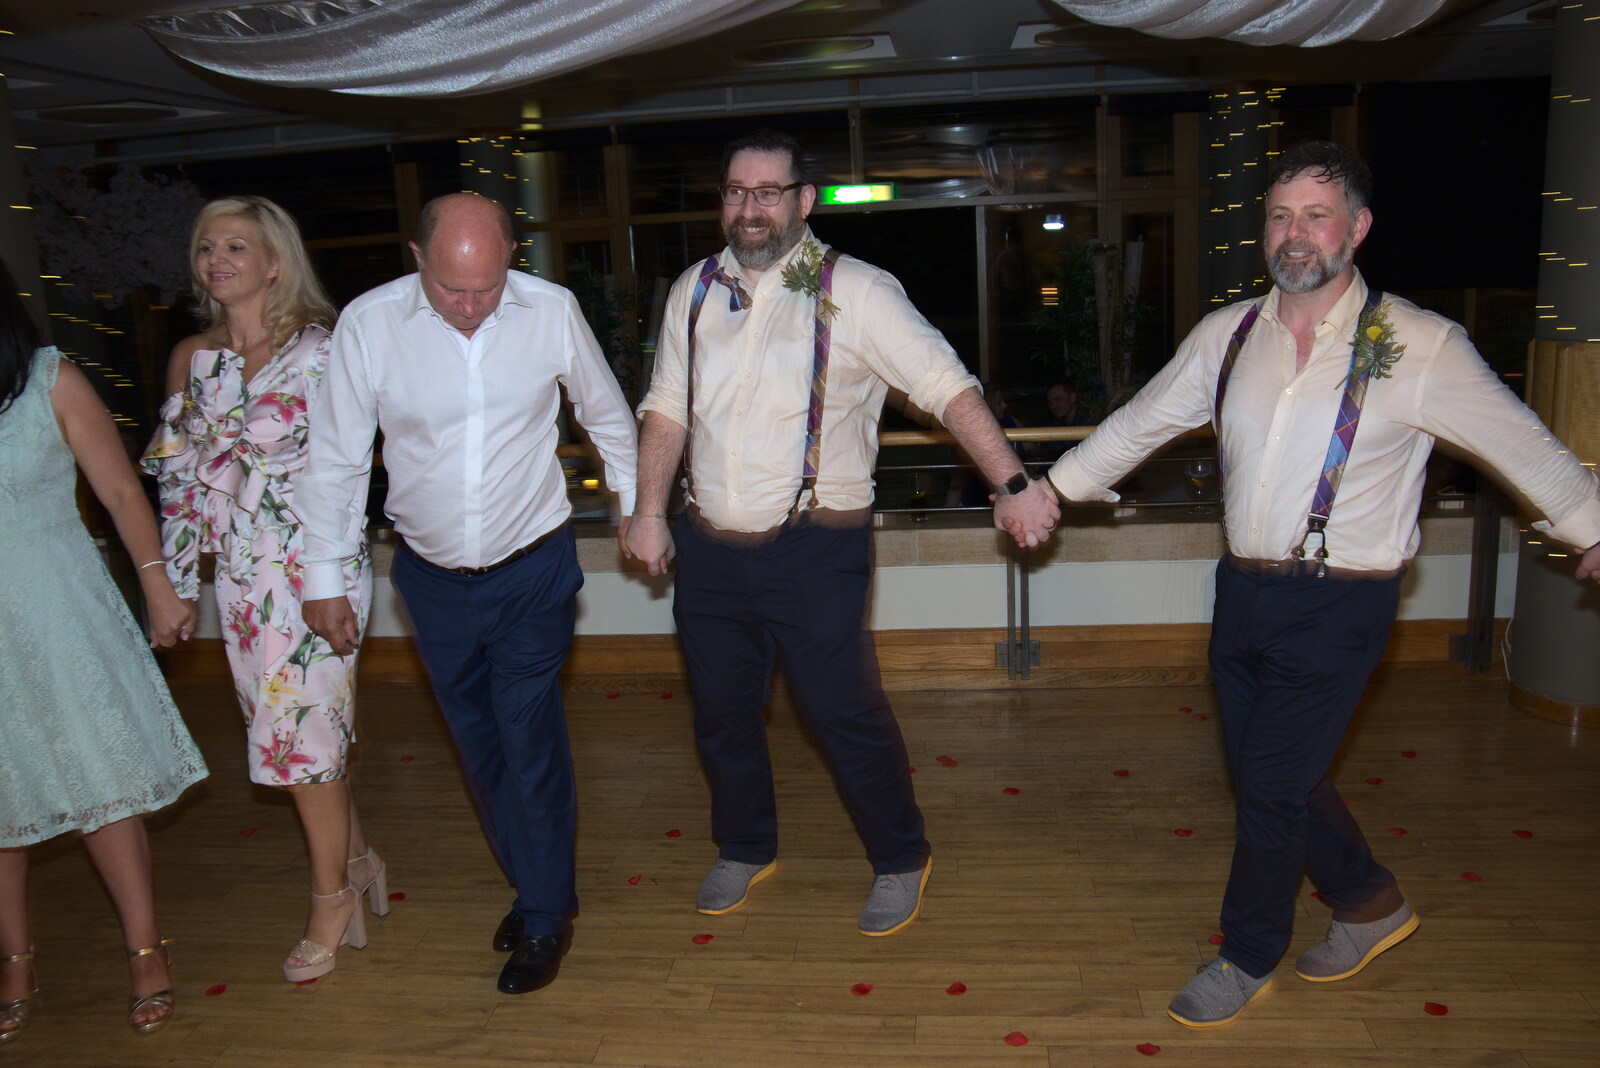 A traditional Croatian dance breaks out from Petay's Wedding Reception, Fanhams Hall, Ware, Hertfordshire - 20th August 2021